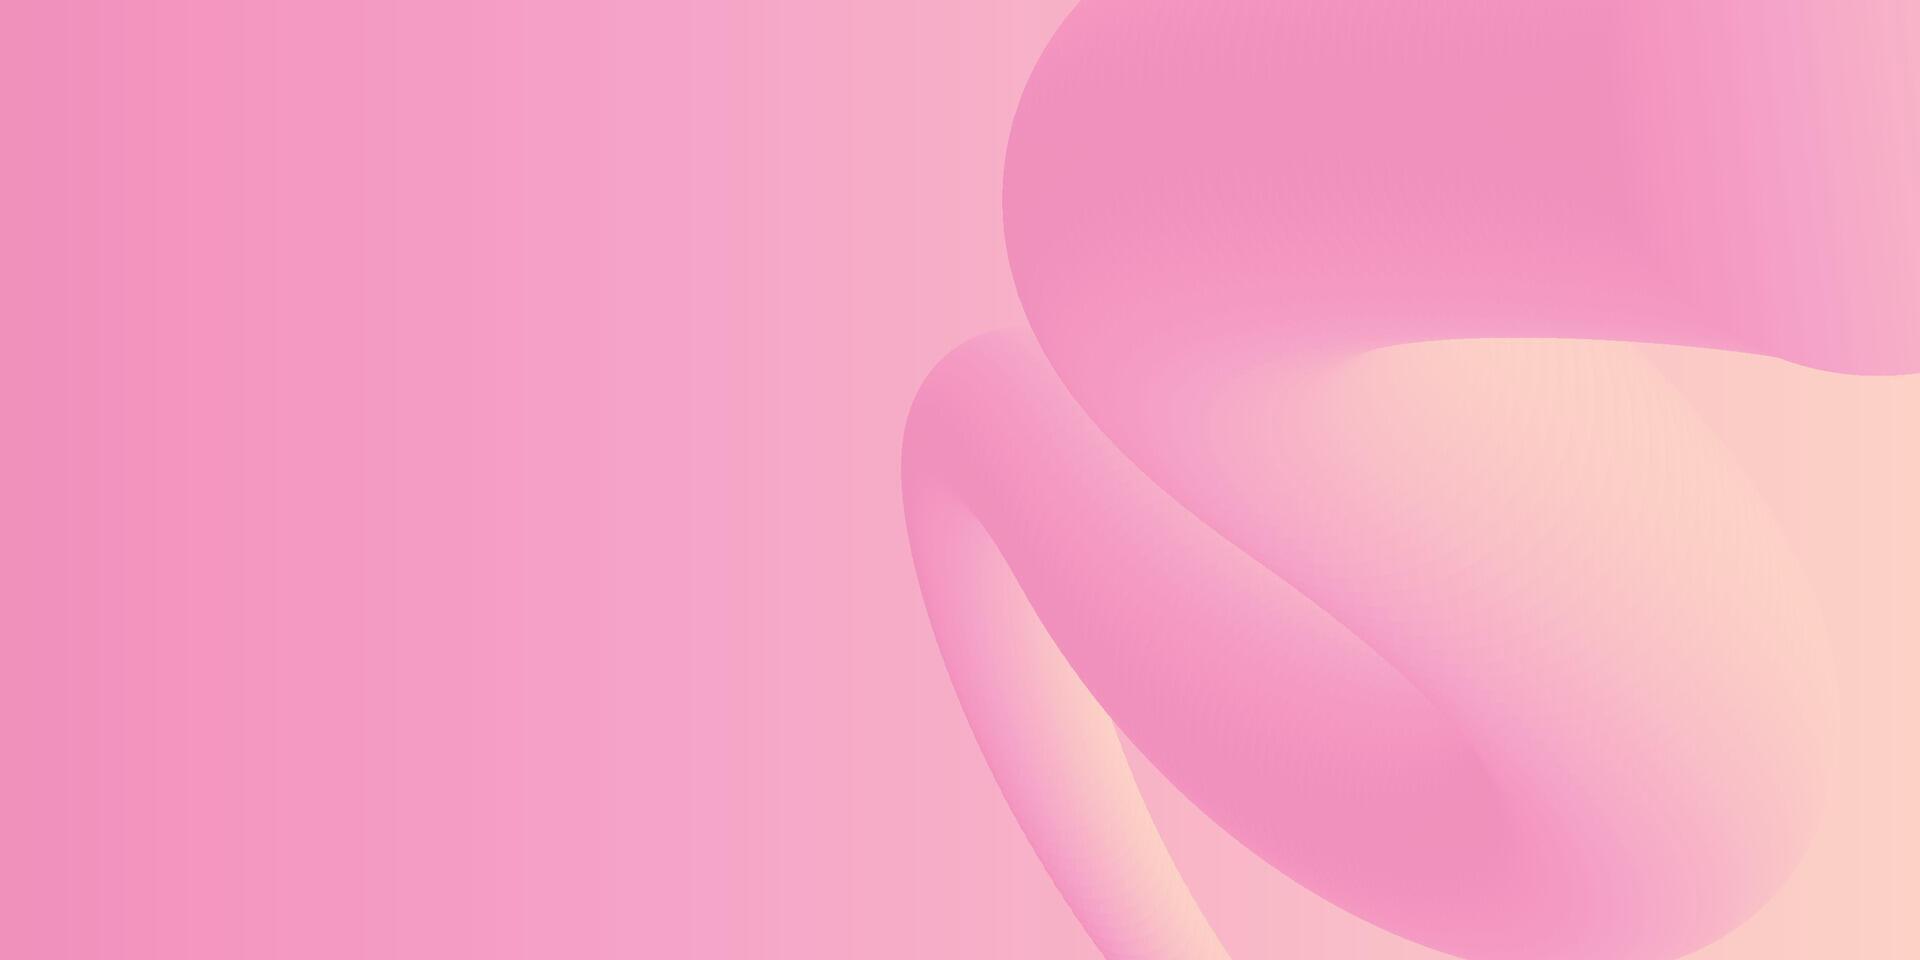 abstract 3D liquid fluid pink color background. Creative minimal sphere balls or bubble trendy colorful gradient design for cover brochure, flyer, poster, banner web. vector